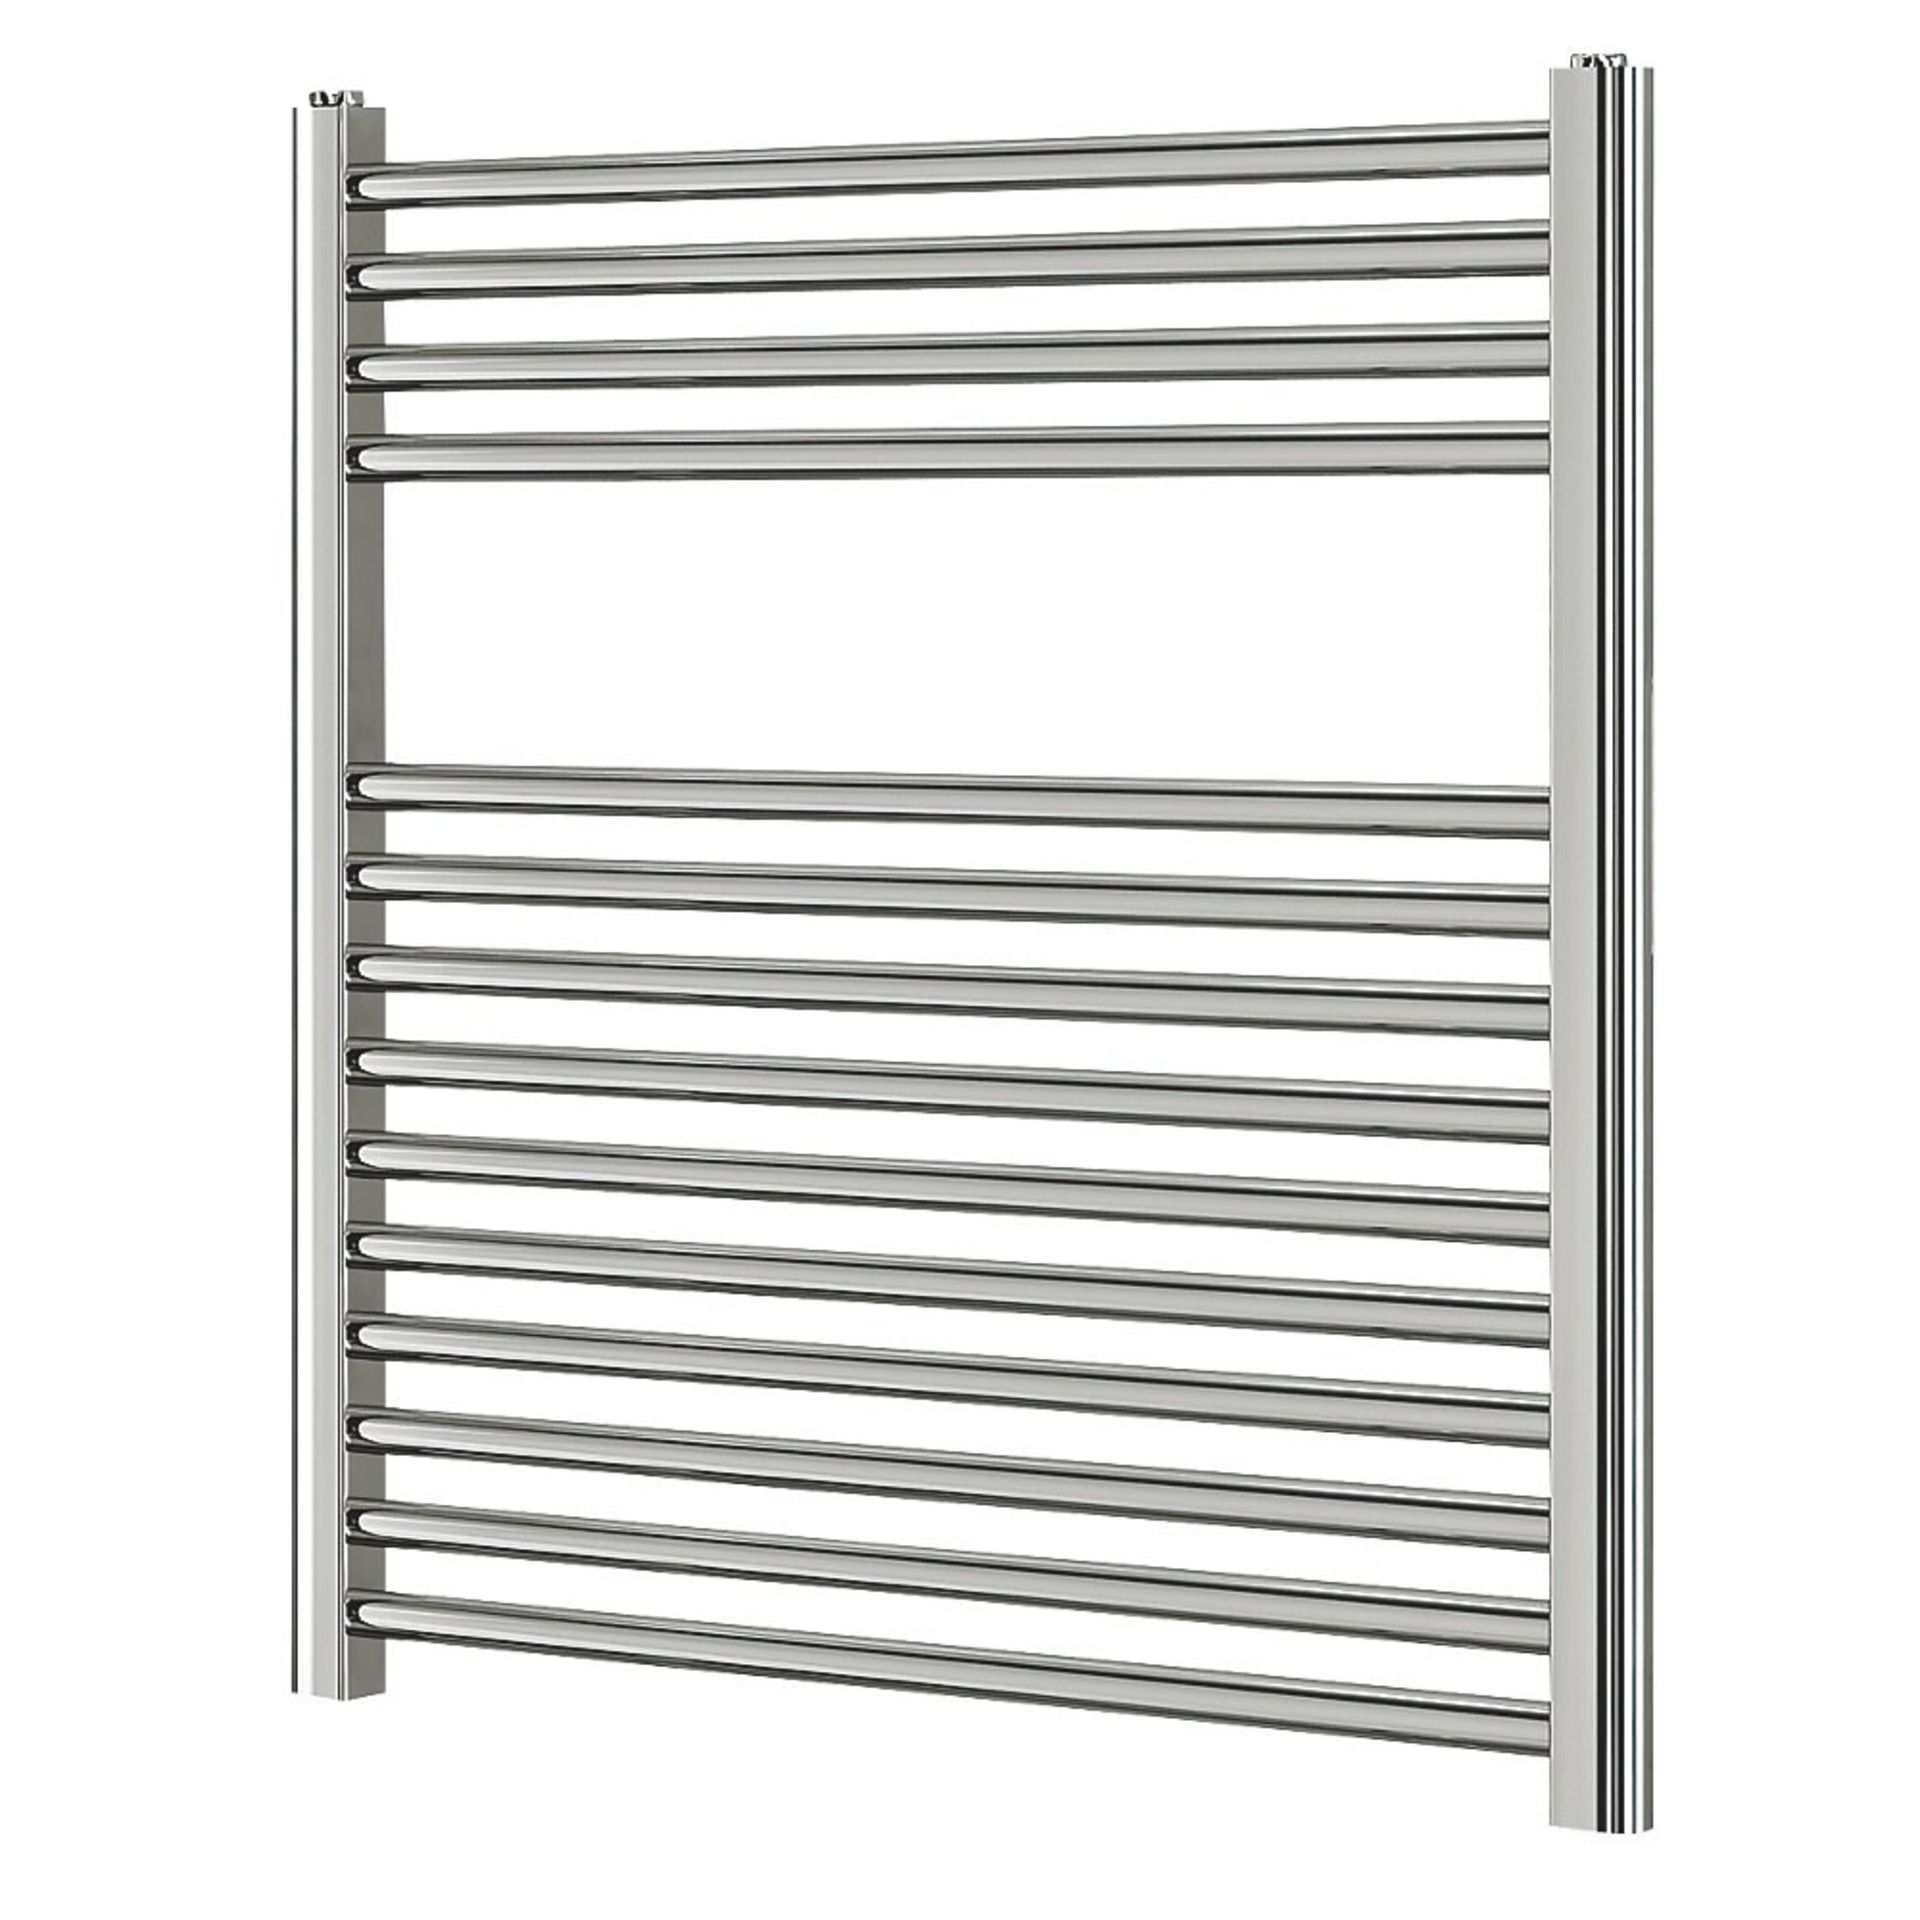 (HM118) 600x500mm Silver Matt Towel Warmer. High quality chrome-plated steel construction. Sui... - Image 2 of 2